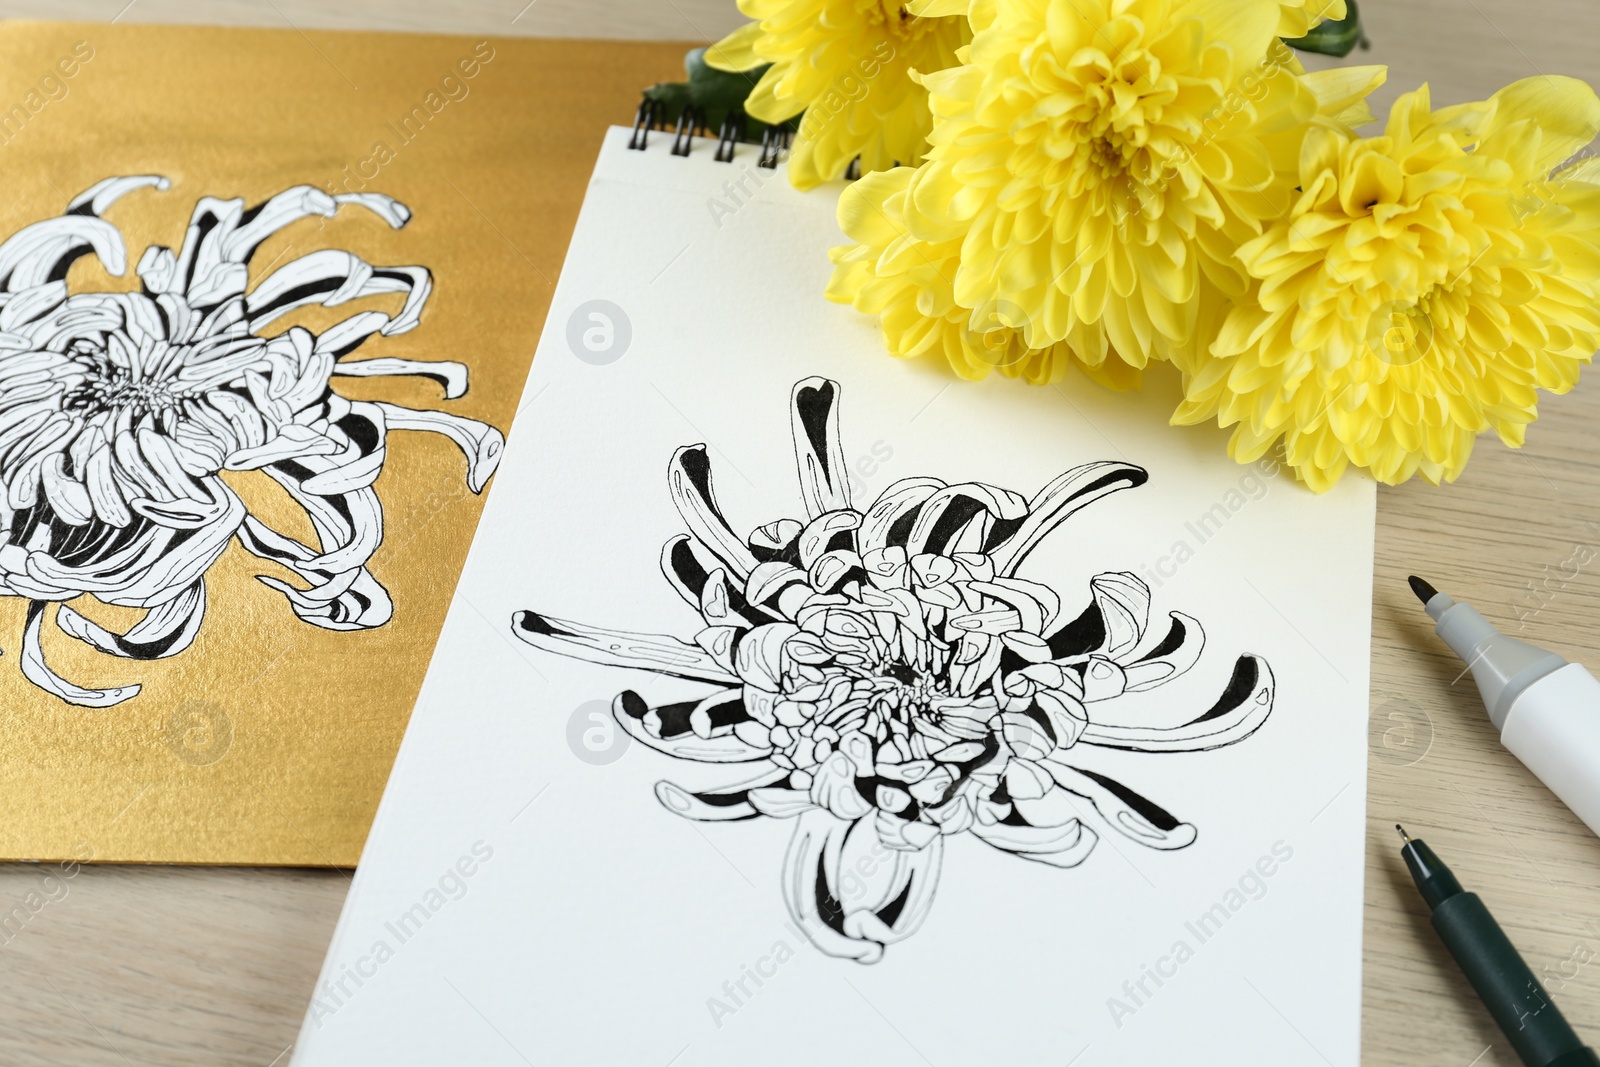 Photo of Drawings of chrysanthemum with flowers and pens on wooden table, closeup